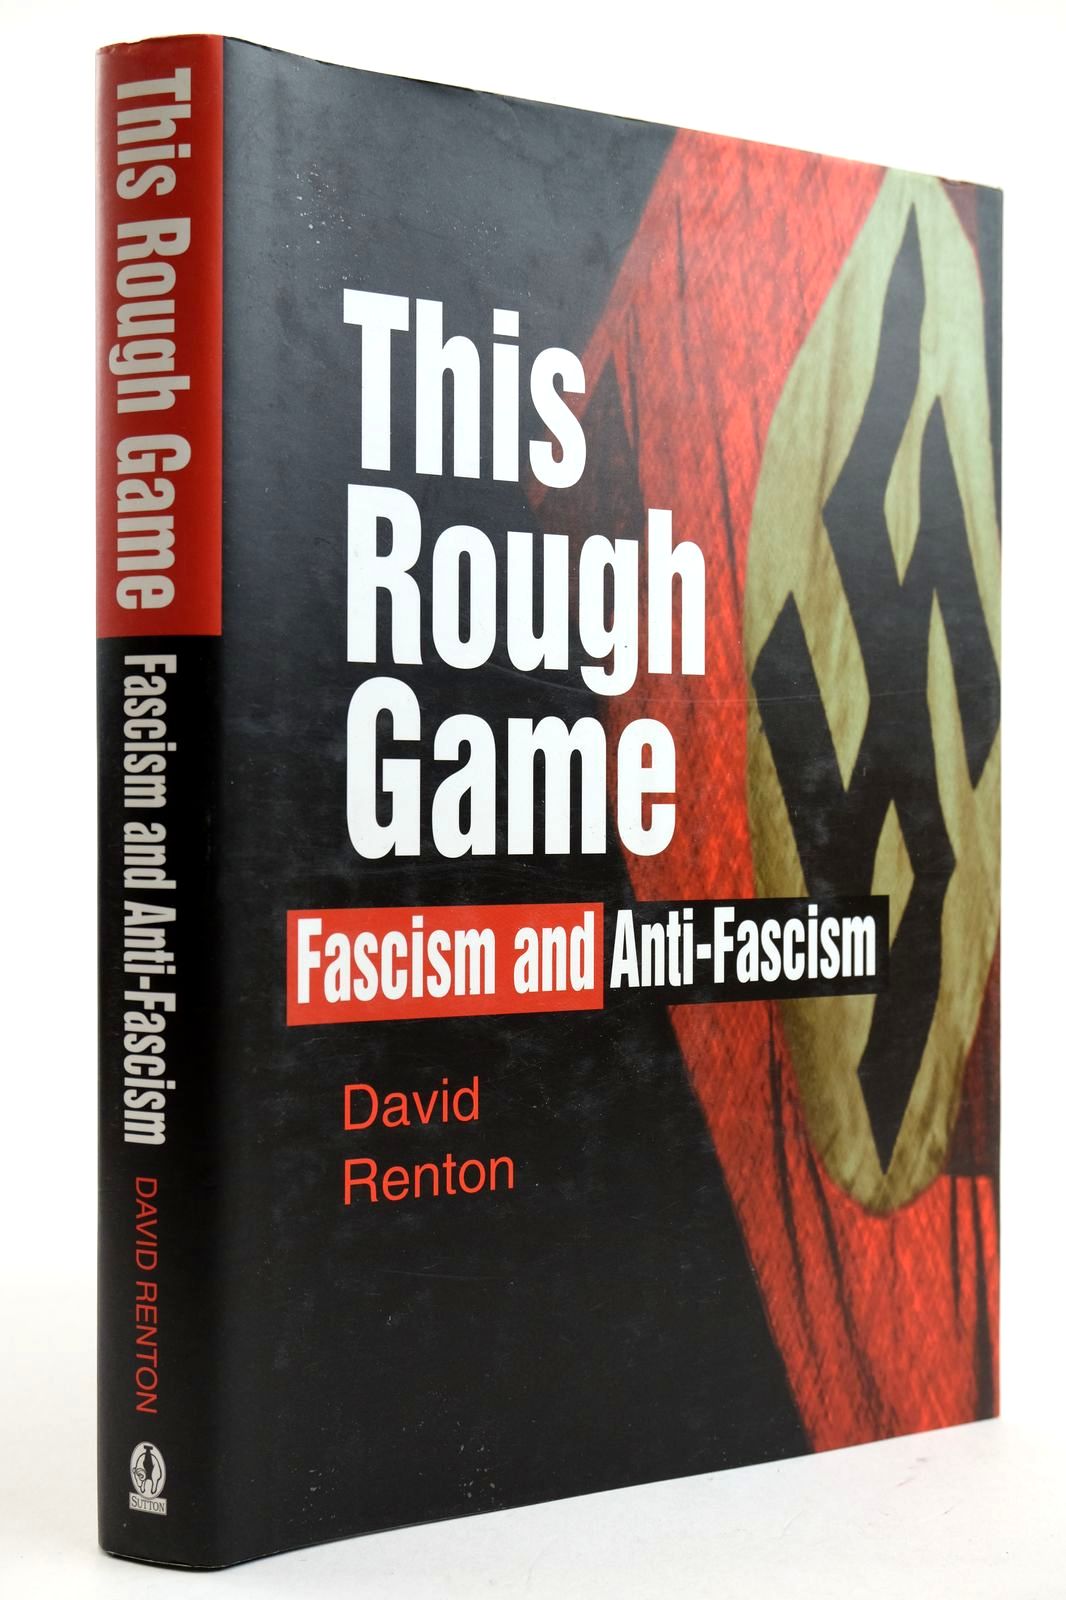 Photo of THIS ROUGH GAME FASCISM AND ANIT-FASCISM written by Renton, David published by Sutton Publishing (STOCK CODE: 2132646)  for sale by Stella & Rose's Books